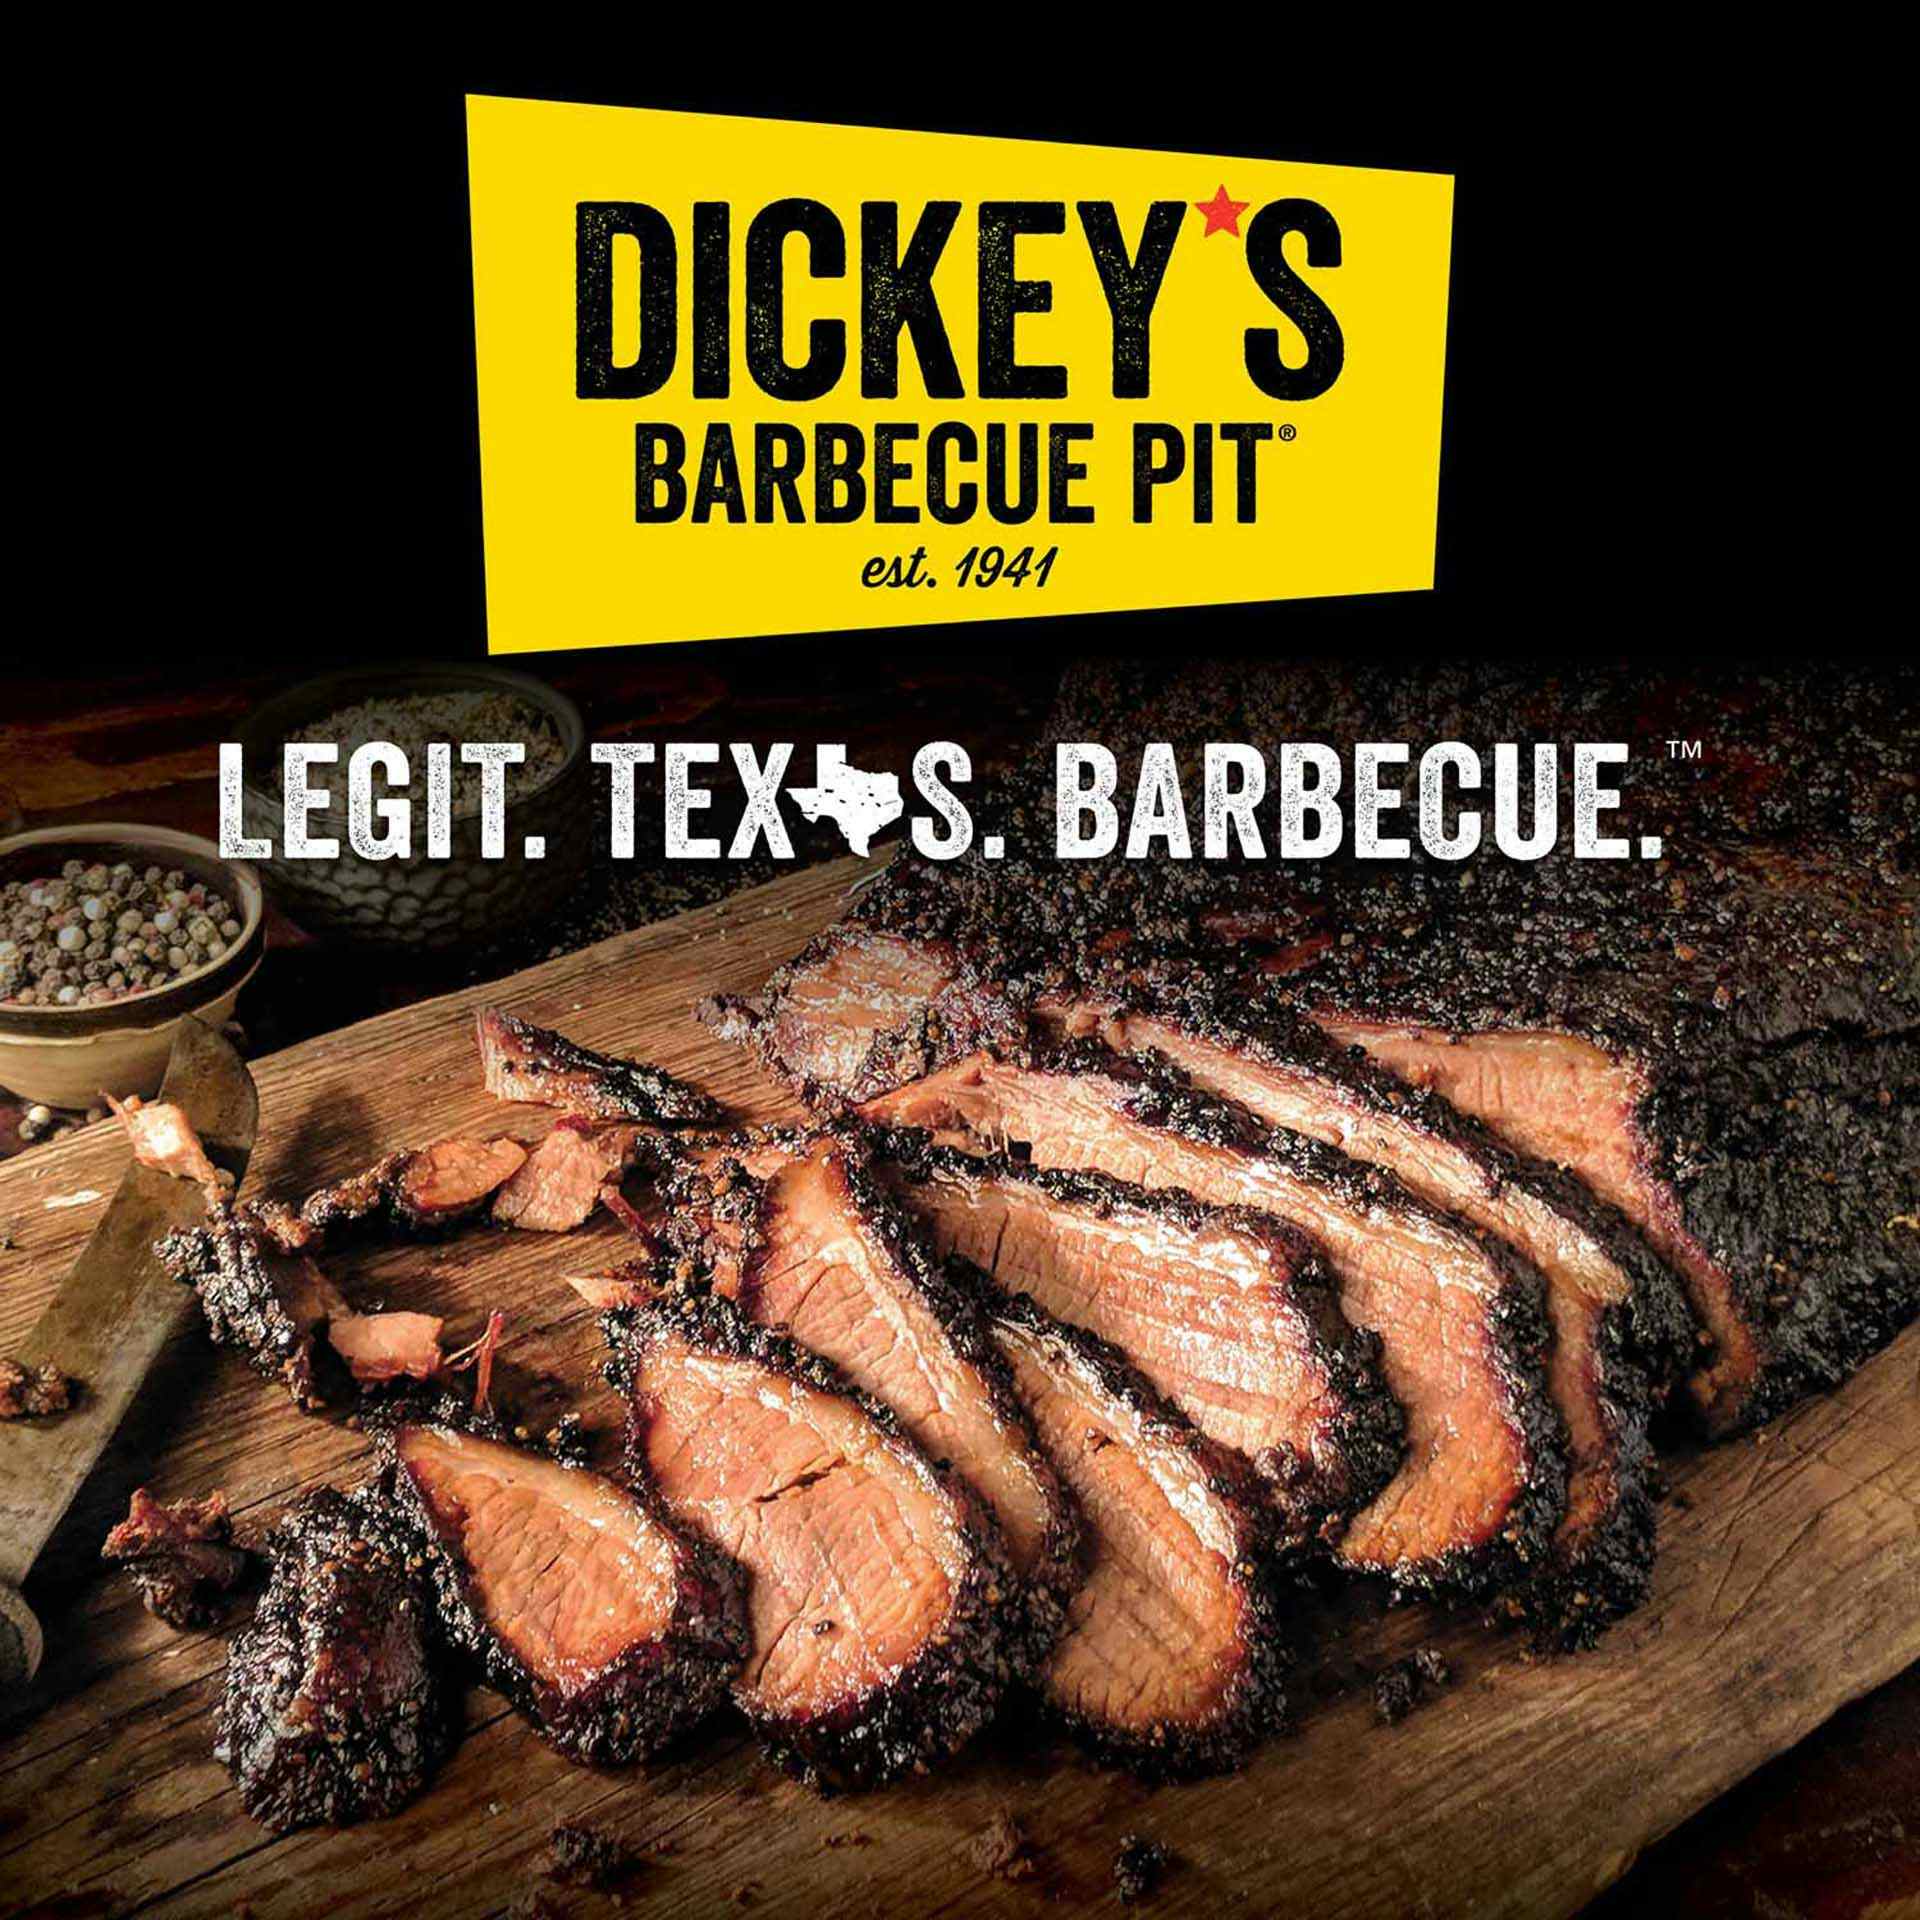 Dallas Innovates: O Canada: Dallas-Based Dickey’s Barbecue Pit is Going Global